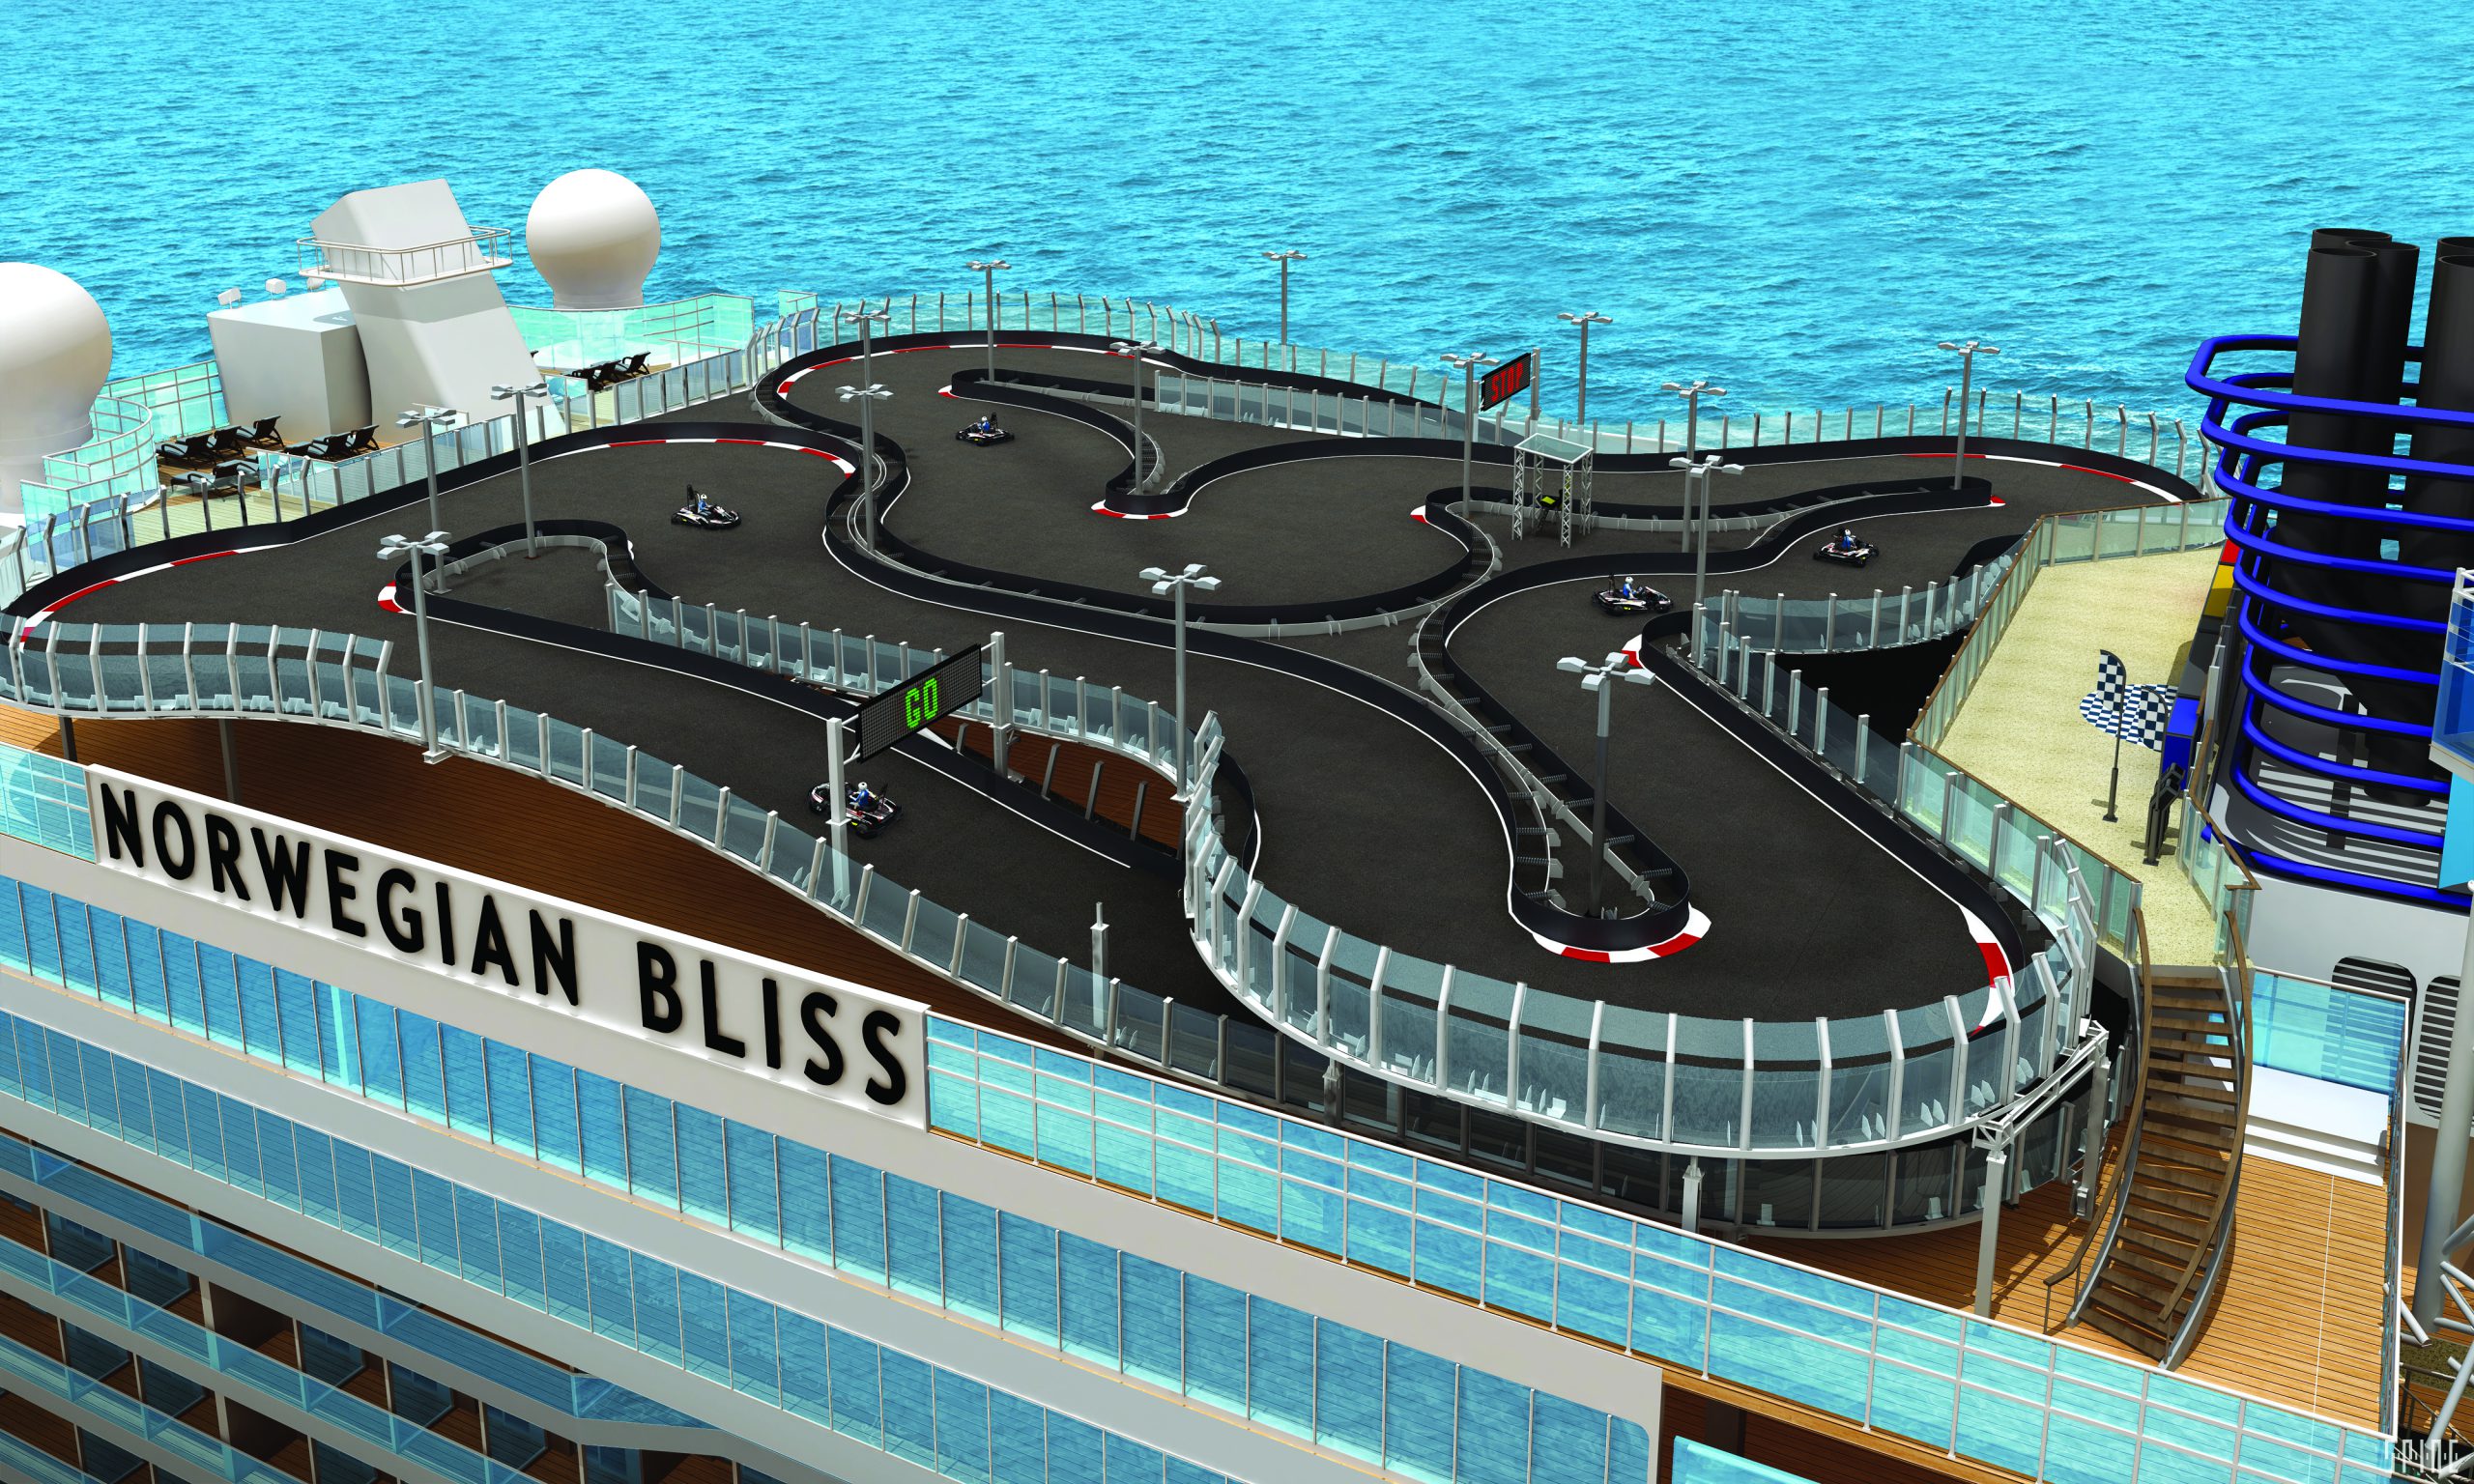 New features on the Norwegian Bliss